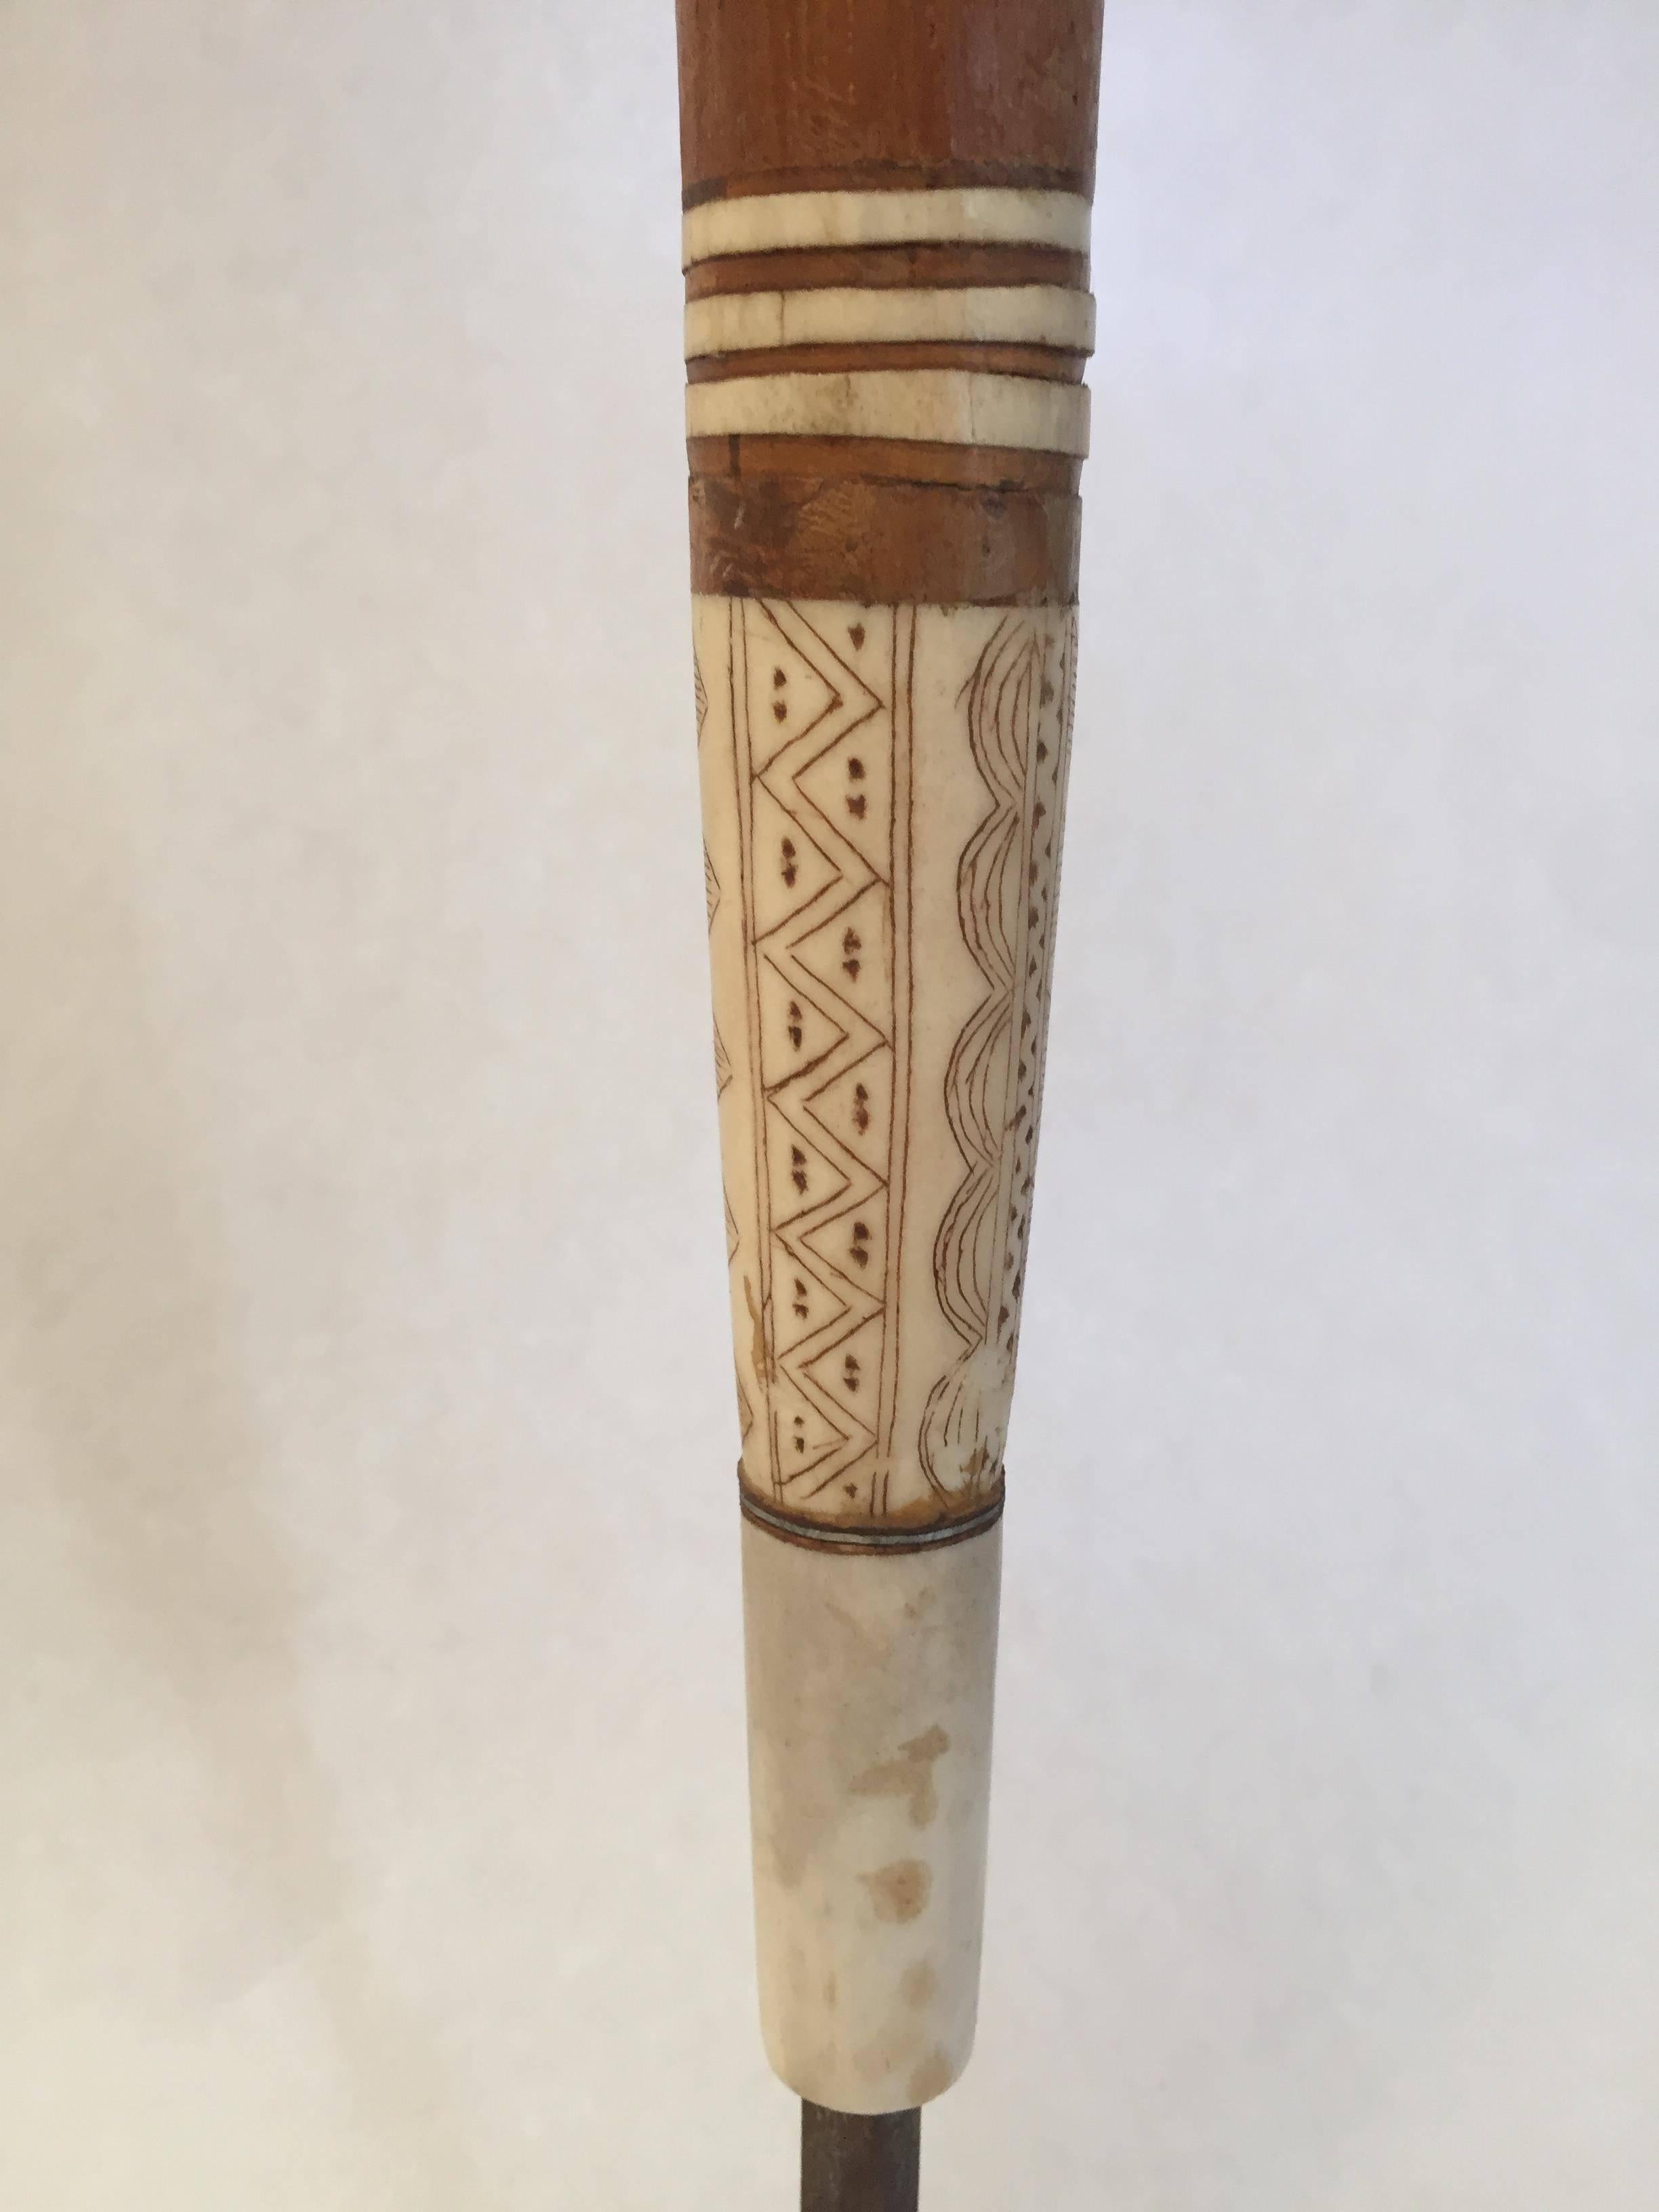 A beautiful piece of Swedish northern native Sami cultural history, a bear spear from the early 20th century made out of oakwood and reindeer horn, the reindeer horn is intricately carved in beautiful patterns along the whole spear.